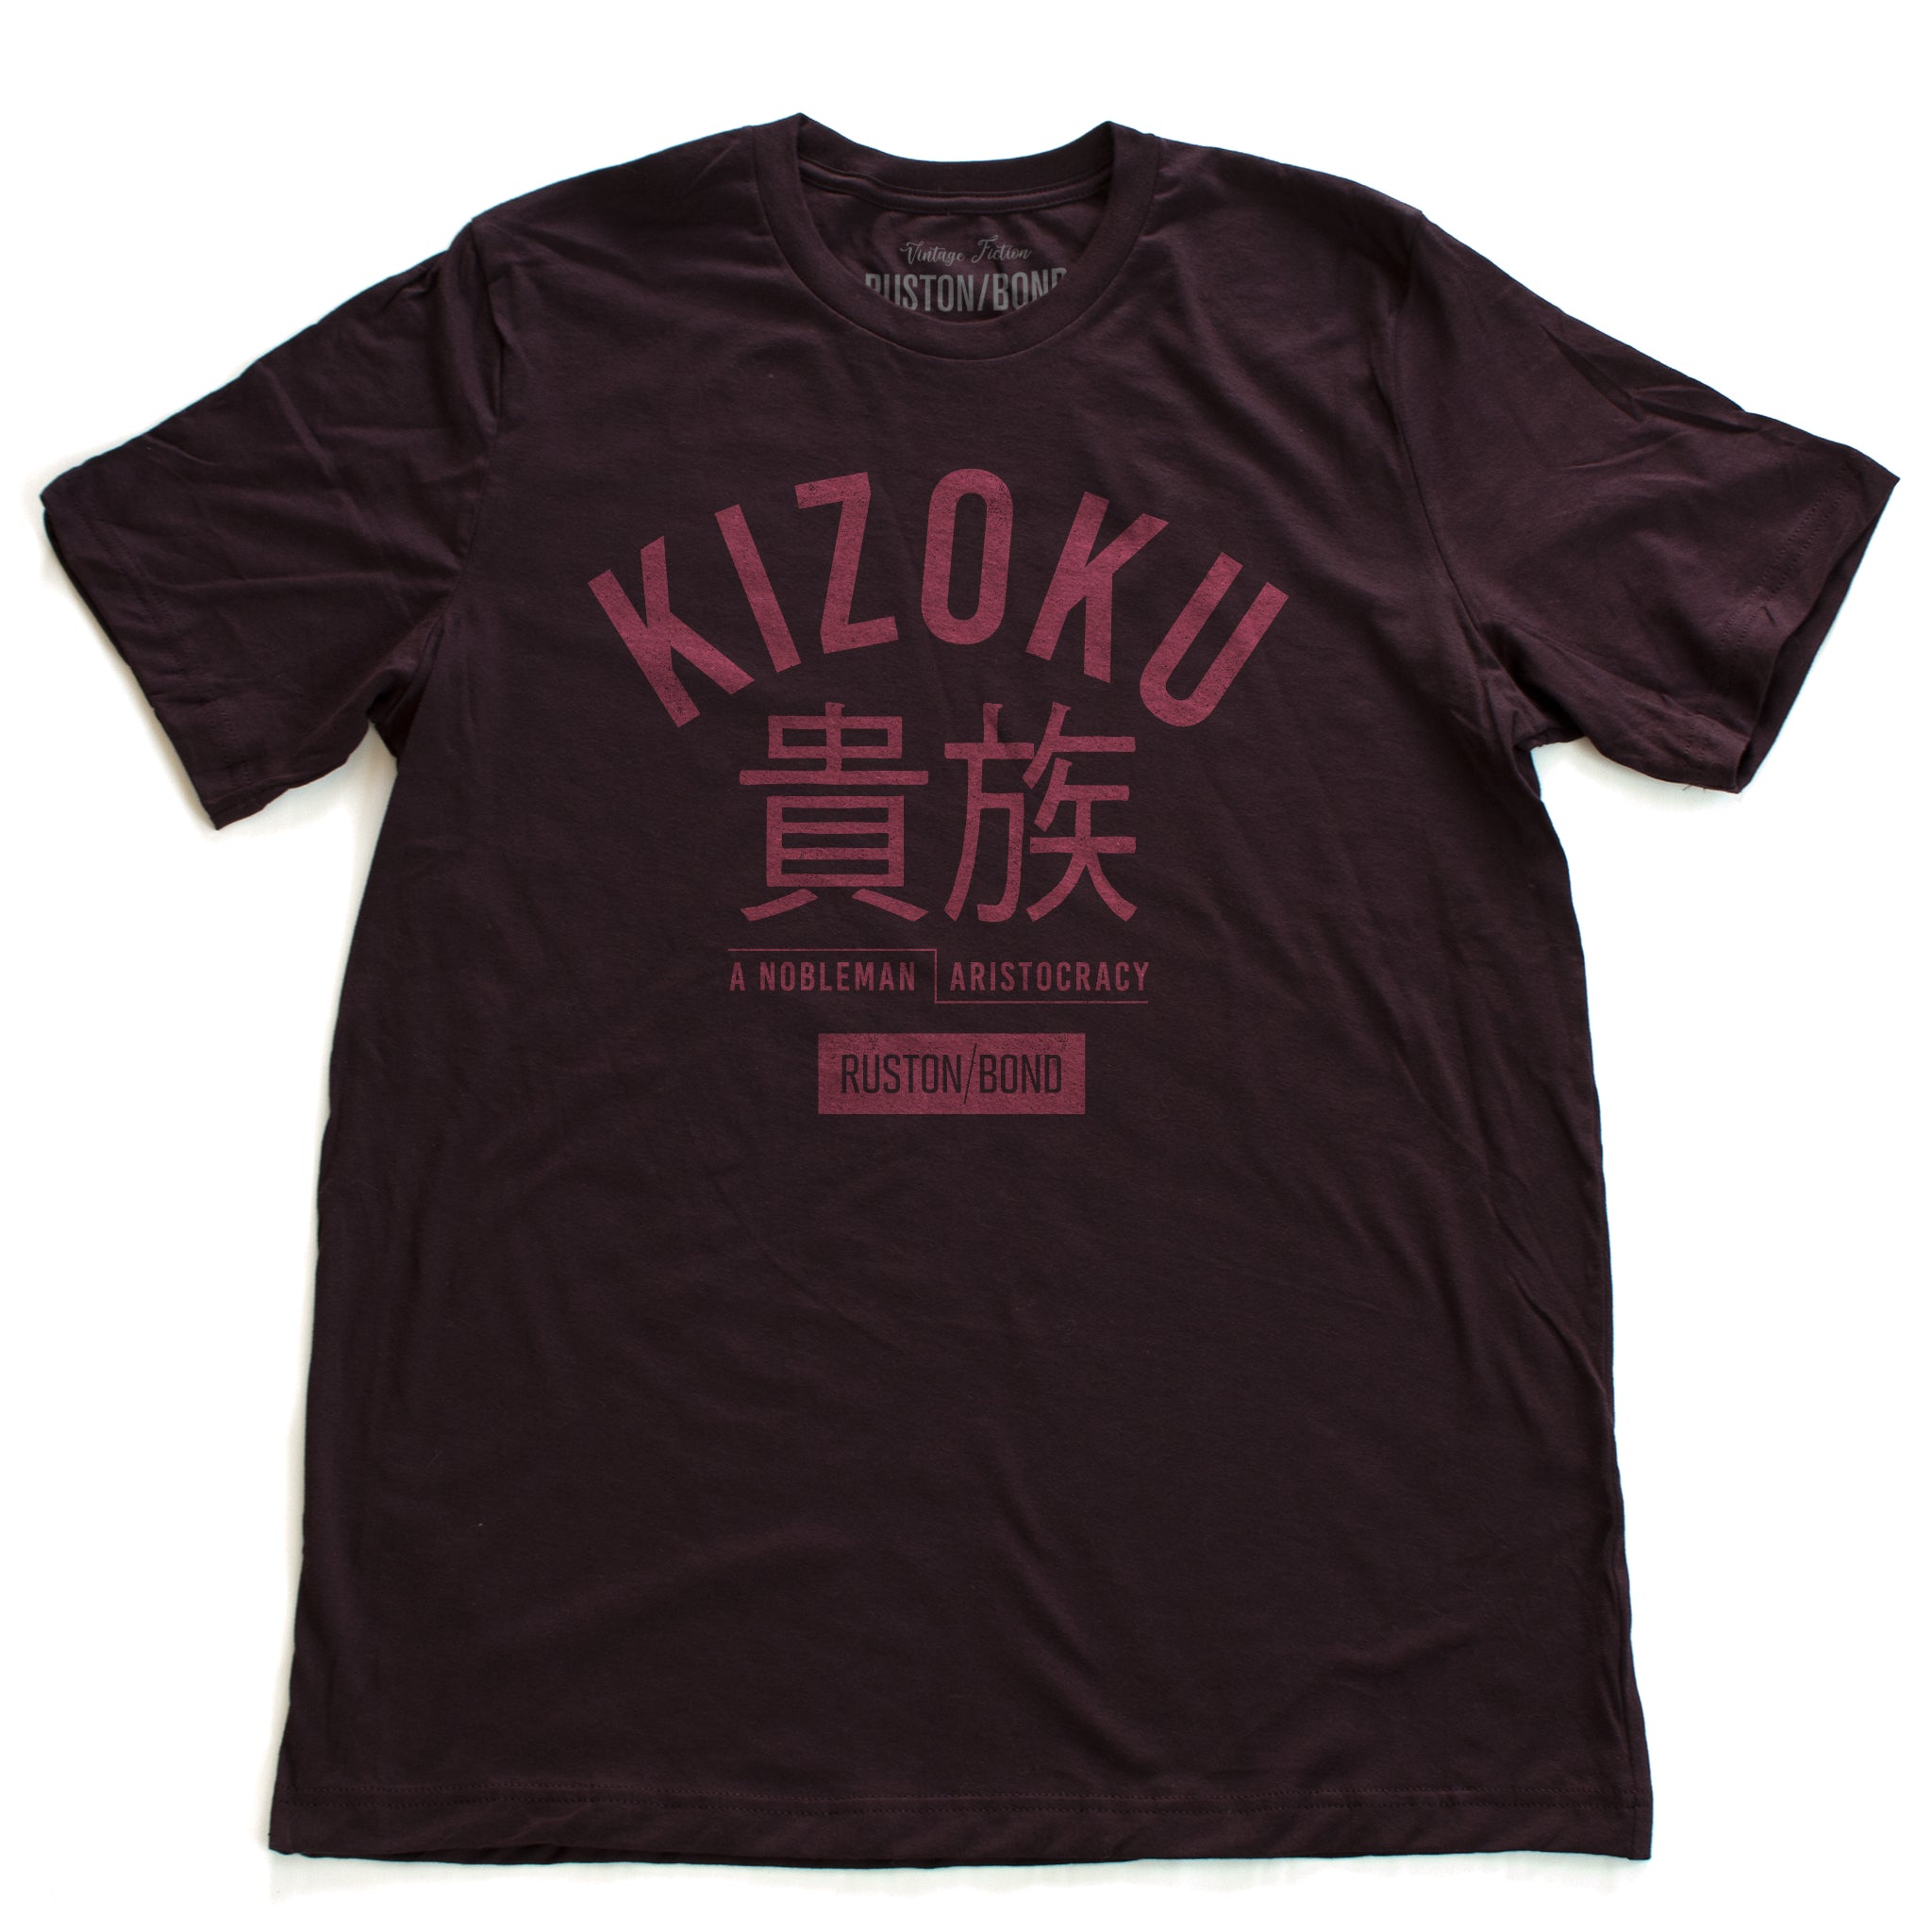 A retro fashion t-shirt in Oxblood with the bold typographic of the Japanese word “KIZOKU” and “a nobleman / aristocracy” below the Japanese characters. By the fashion brand Ruston/Bond, from wolfsaint.net. 